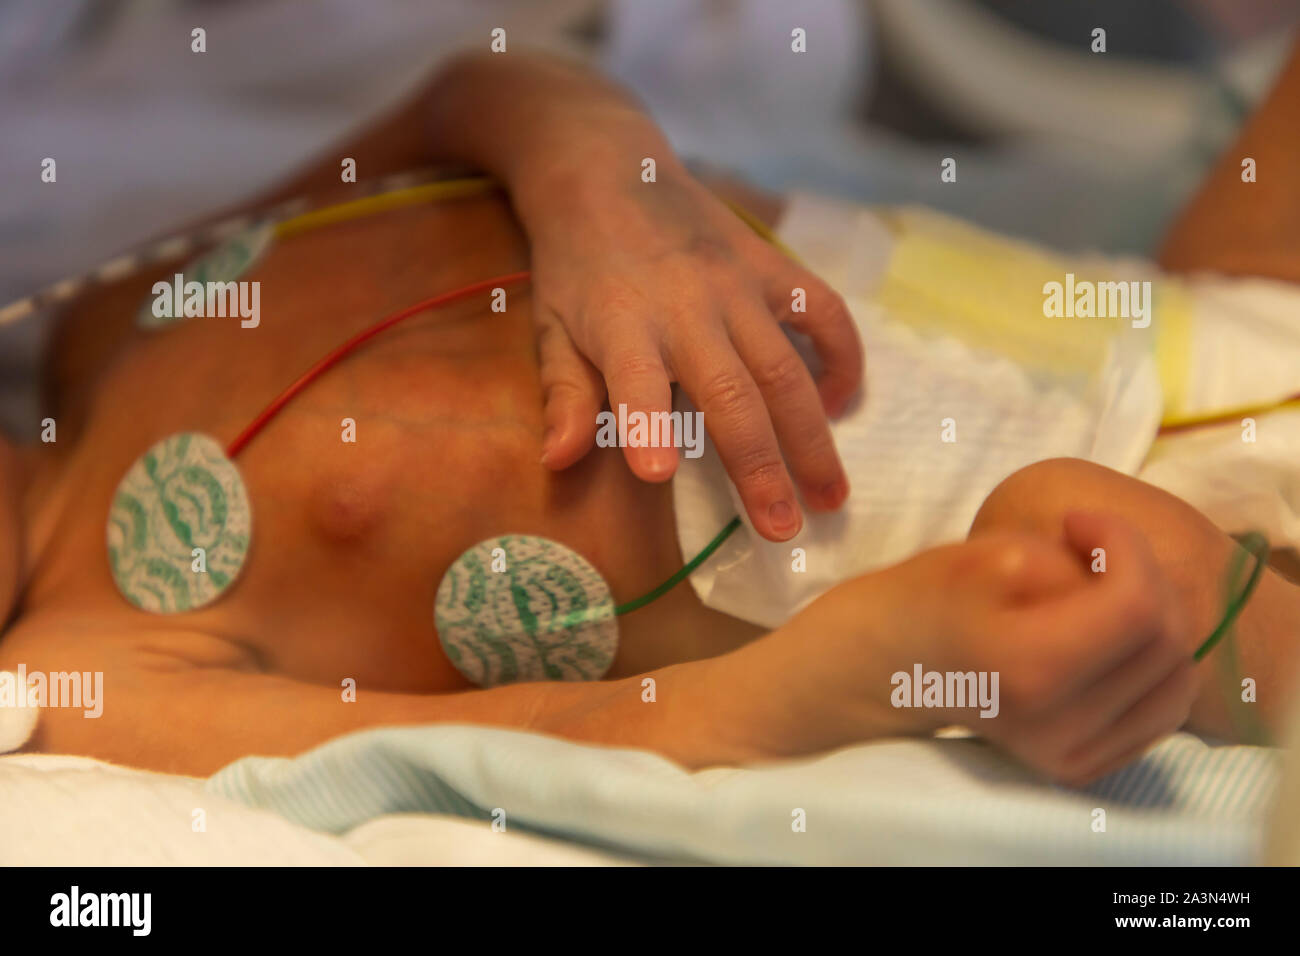 Premature birth ward in a hospital, neonatology department, premature infants in an incubator, Stock Photo